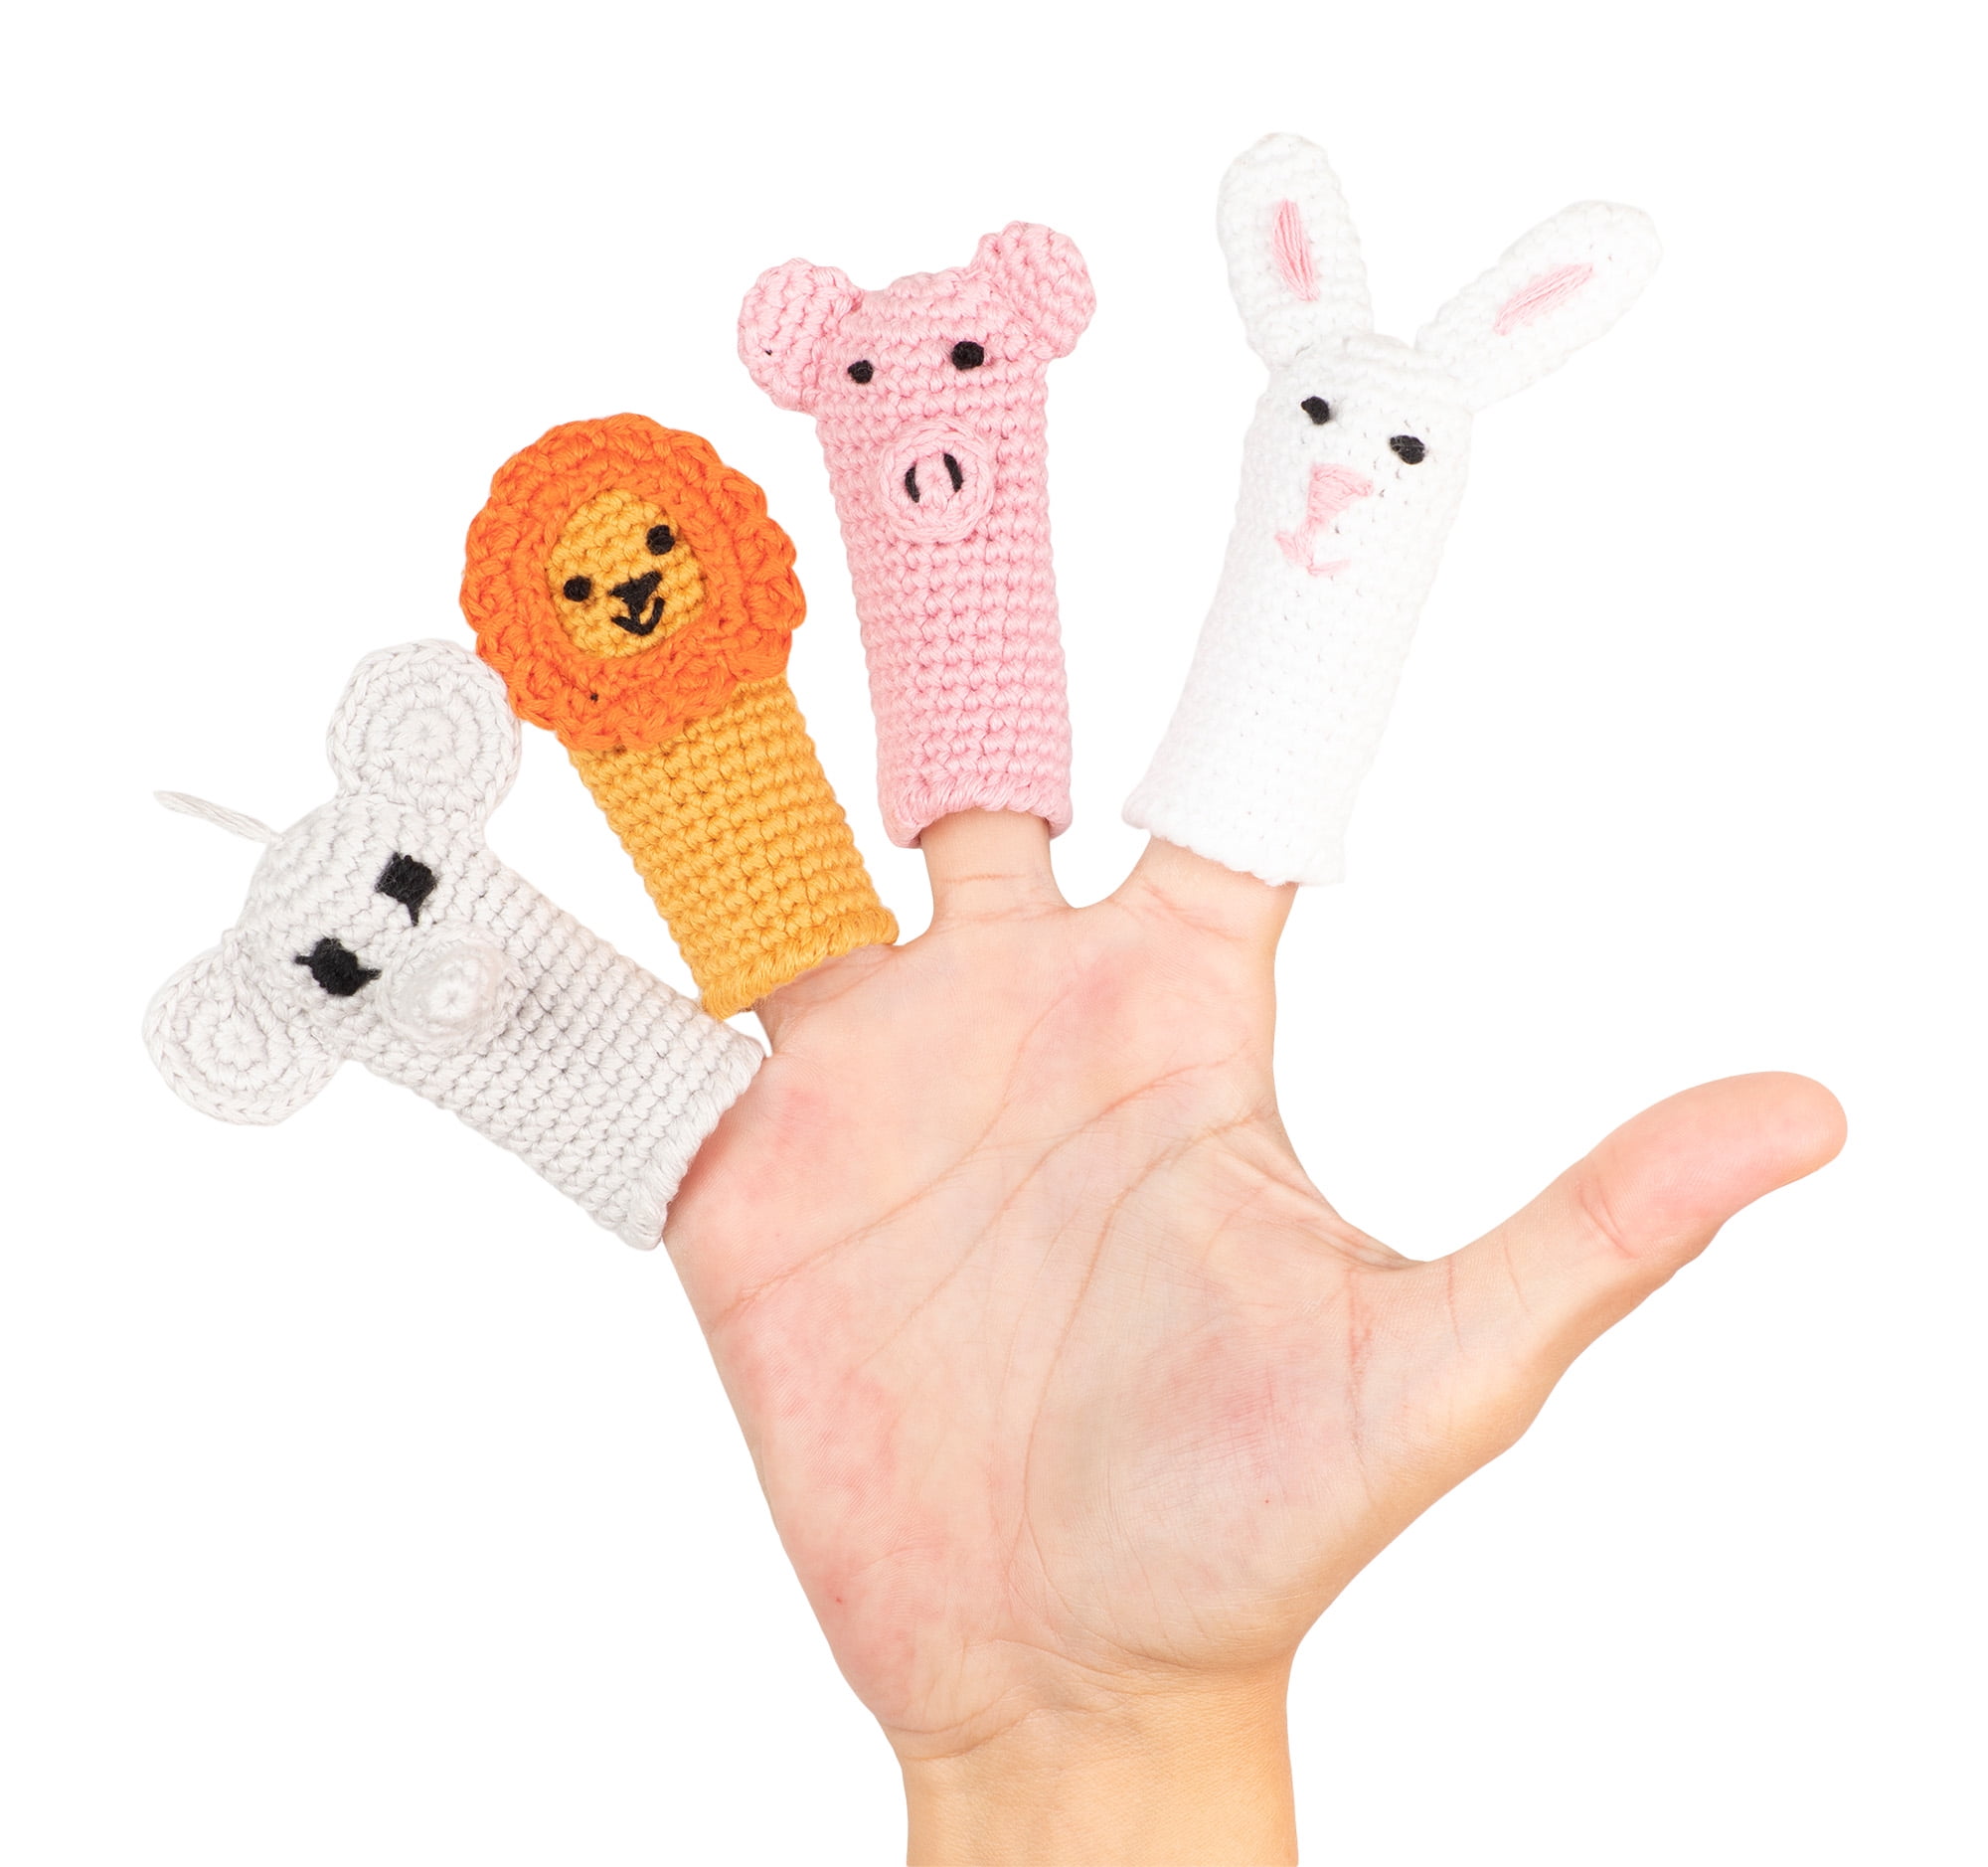 Cuddoll Farm Animal Finger Beautiful Puppet Crochet Organic Cotton Yarn  Role-Play Interactive Knitted USA Handmade 3/8cm Lion, Pig, Bunny, Elephant  Adorable Gift for Kids on Easter Day 